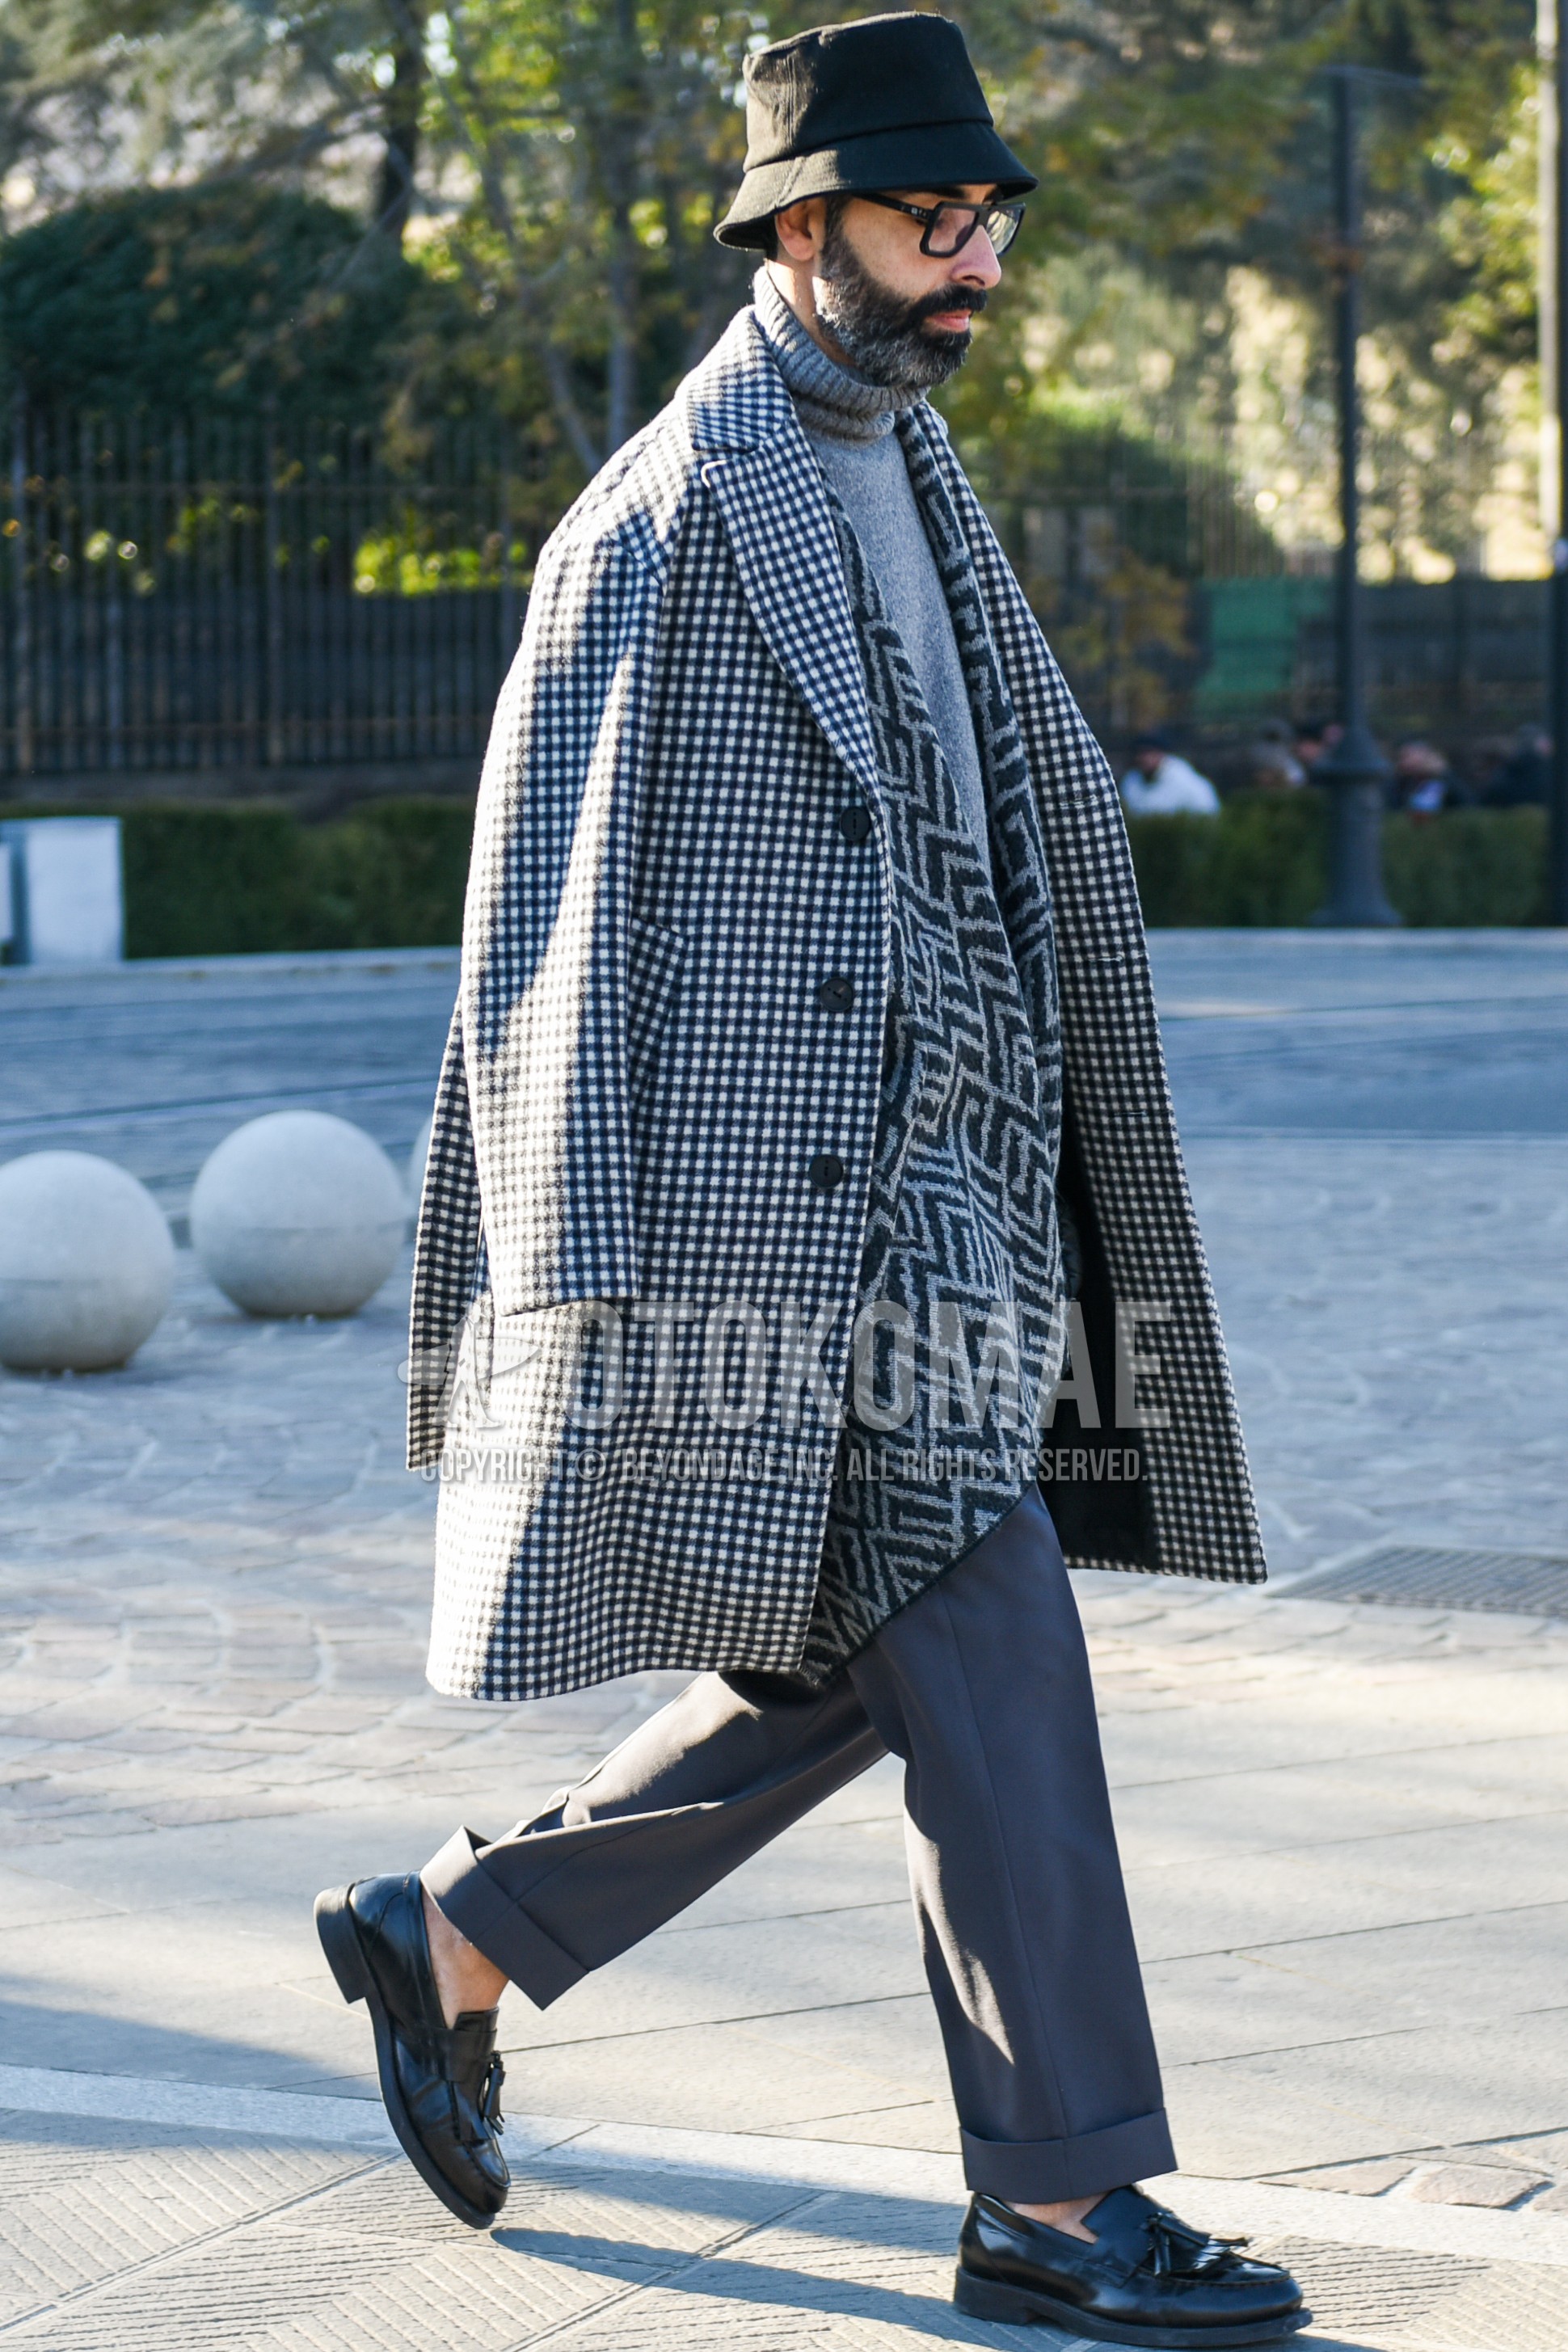 Men's autumn winter outfit with black plain hat, black plain glasses, gray scarf scarf, white black check chester coat, gray plain turtleneck knit, gray plain slacks, gray plain ankle pants, black tassel loafers leather shoes.